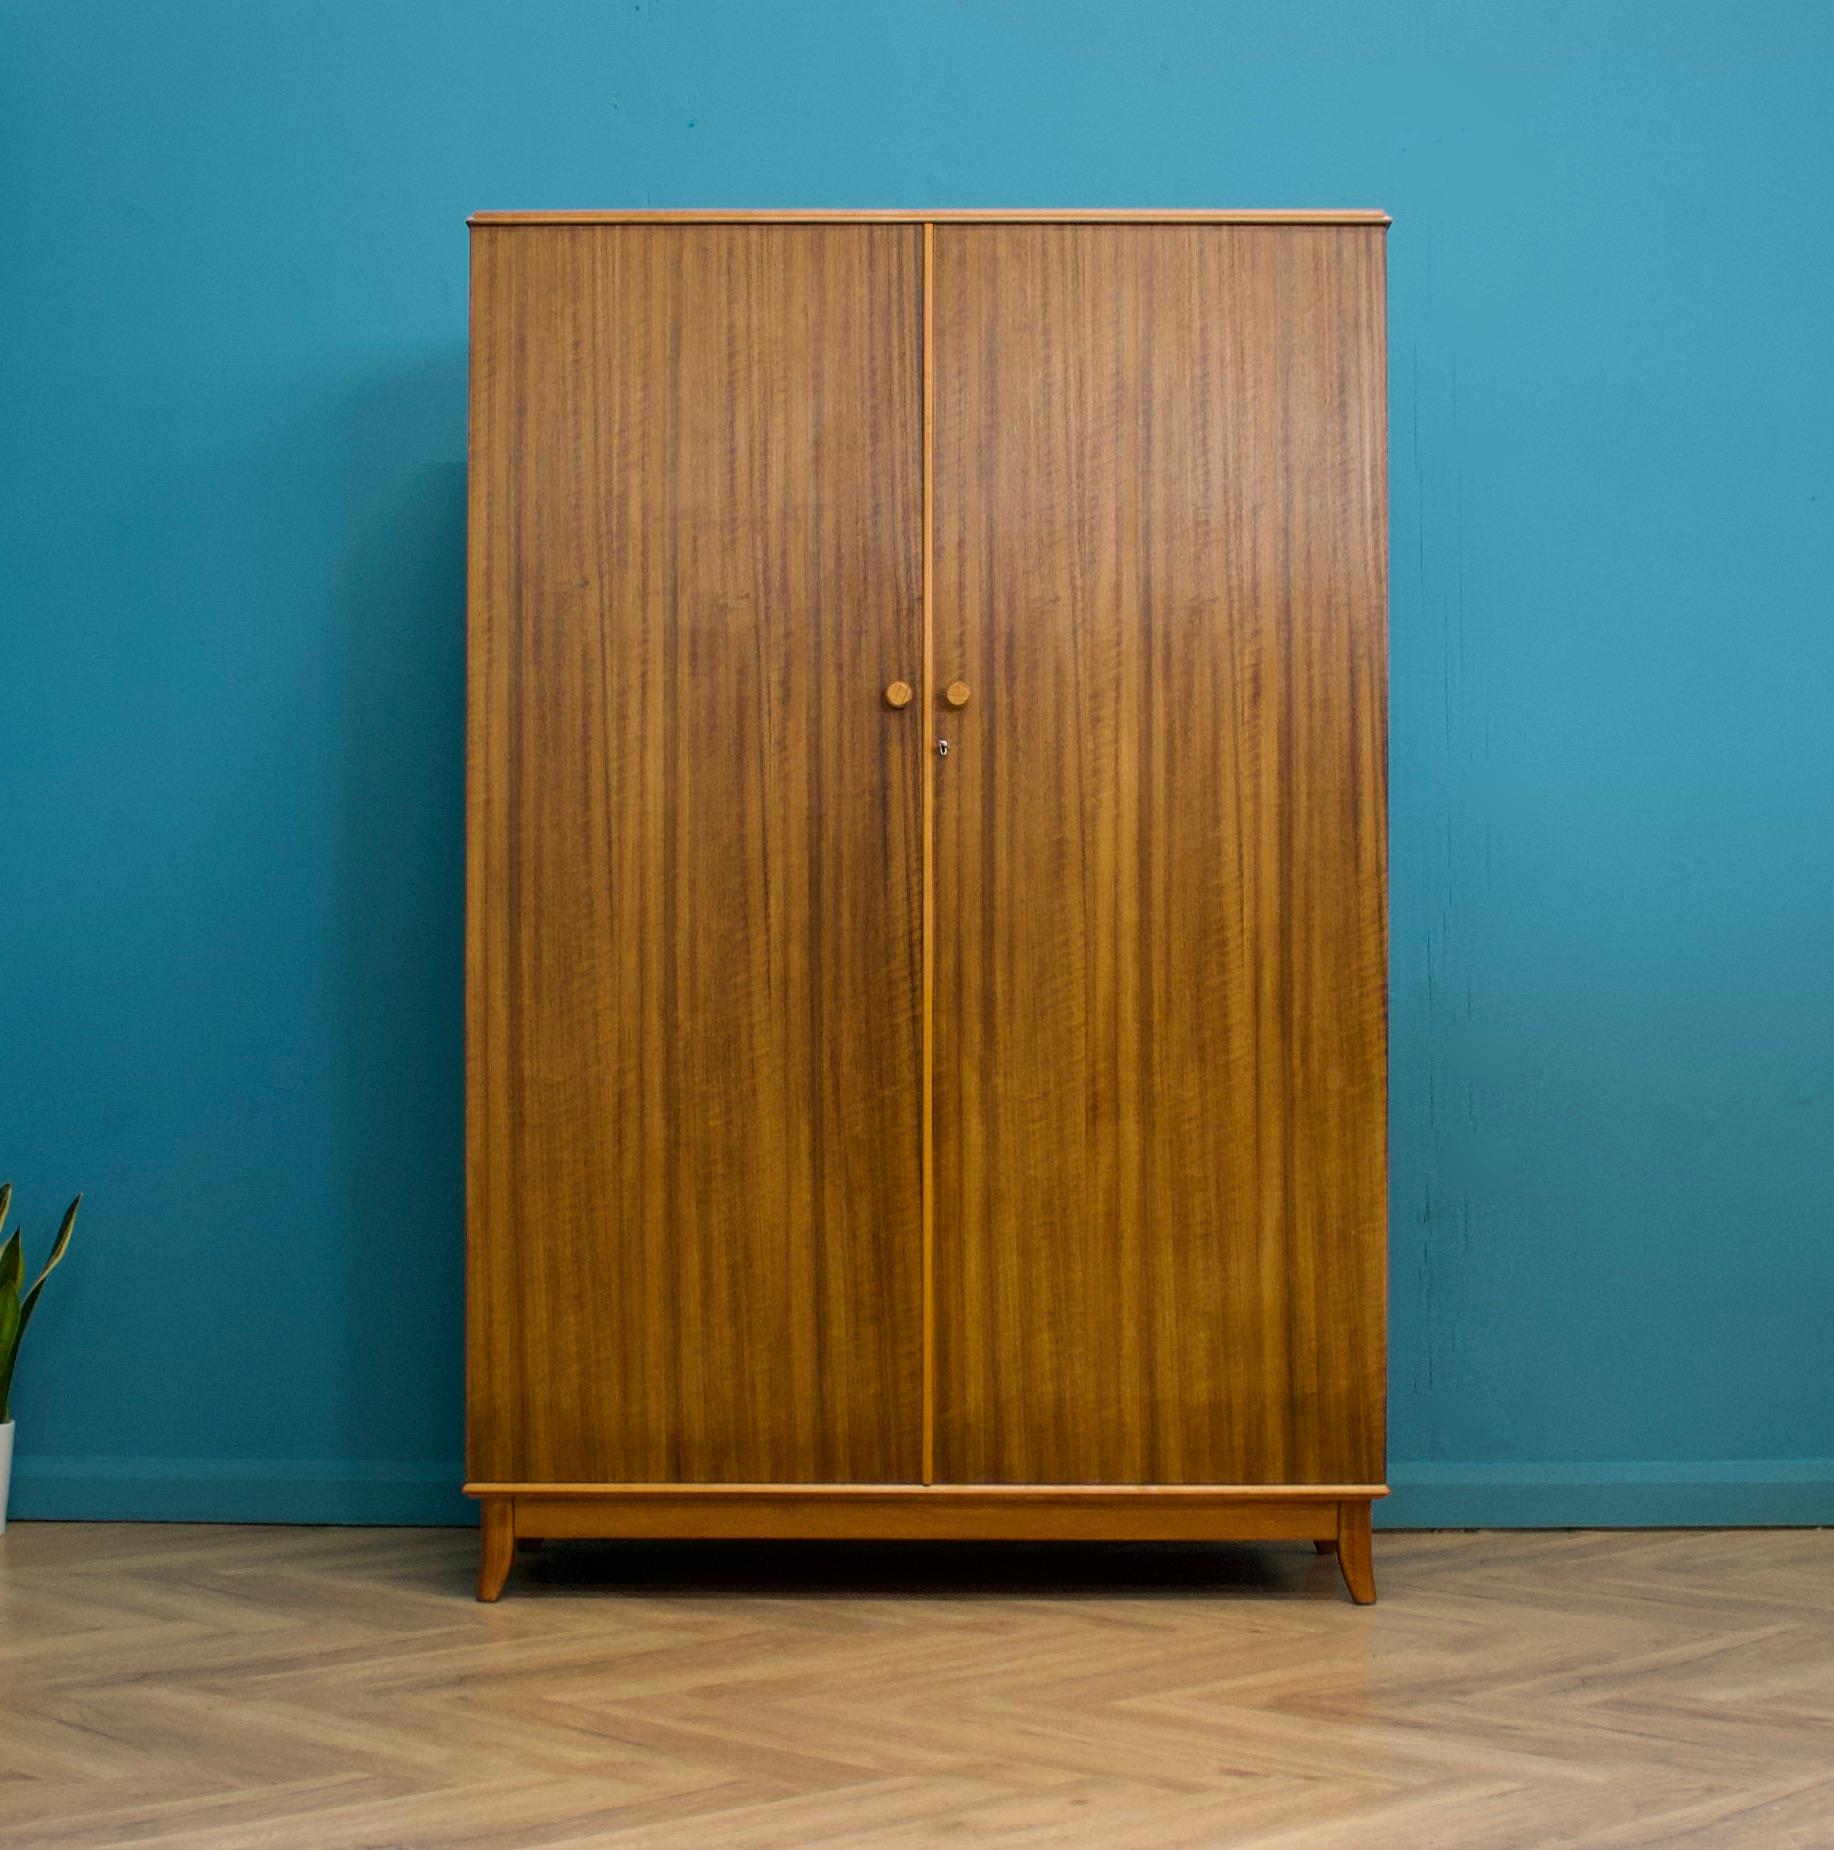 A walnut freestanding wardrobe by Heals - circa 1950s
Internally there are two rails and a shelf
The attractive legs are slightly tapered and splayed, complete with a working lock 

The matching dressing table is available on a separate listing 